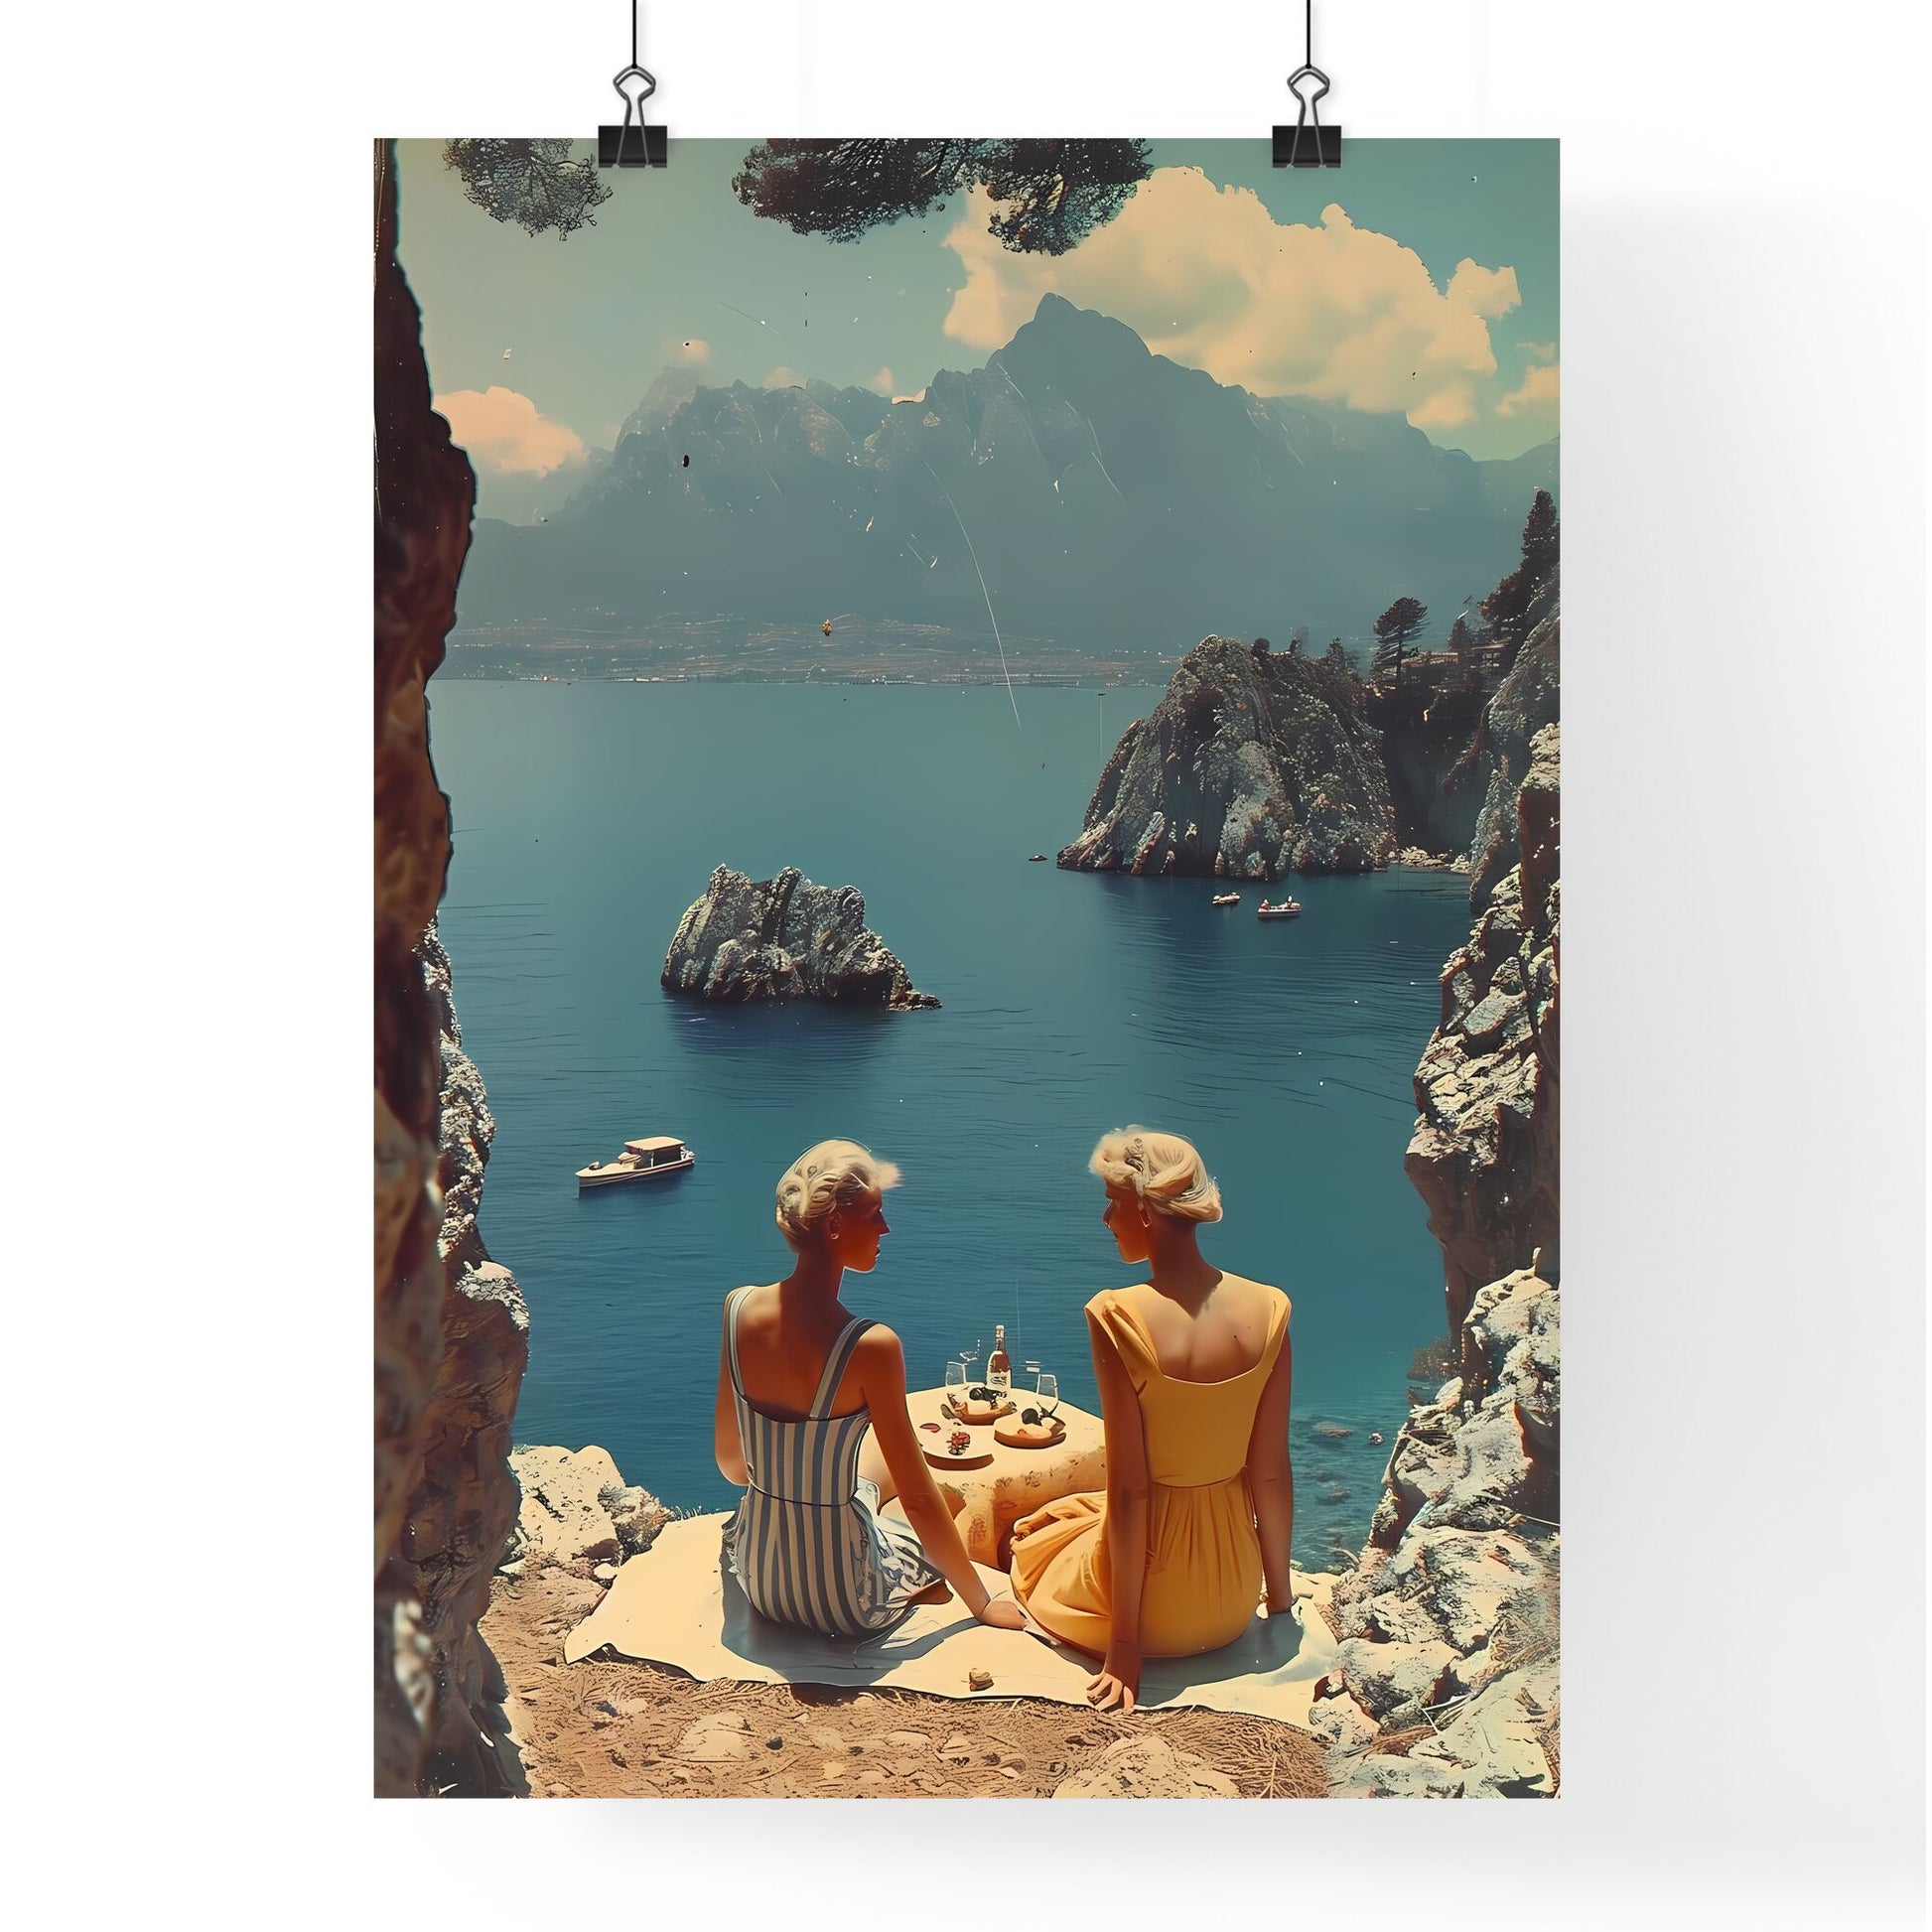 A landscape of the German countryside - Art print of two women sitting at a table overlooking a body of water Default Title